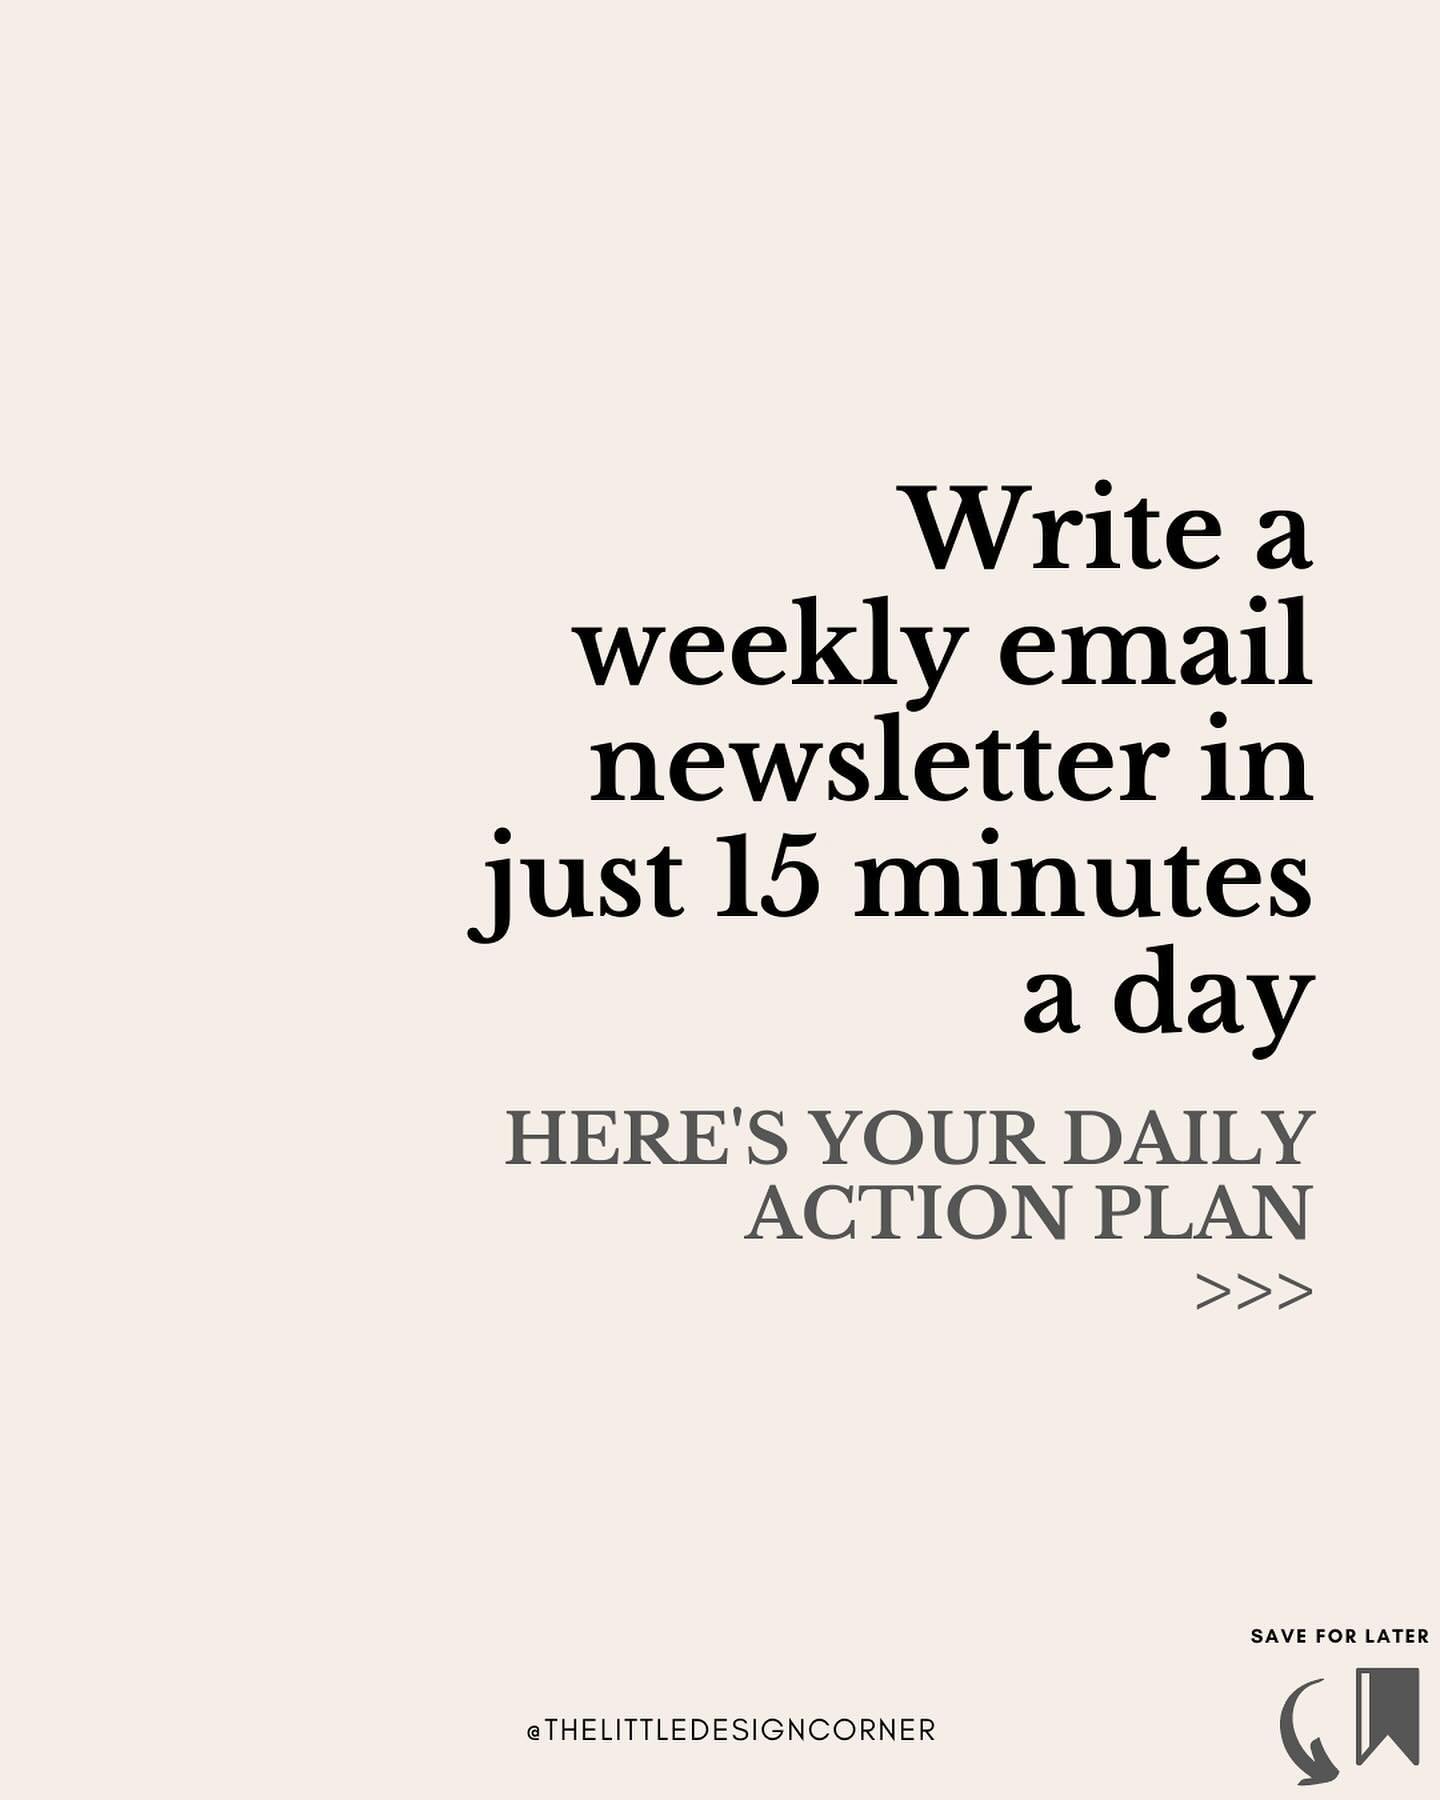 💾 SAVE for later and swipe for your daily action plan &gt;&gt;&gt;

Also - if you&rsquo;re new here&hellip;

👋 Follow me&nbsp;@thelittledesigncorner&nbsp;and binge all the other content I have to help you start, grow and scale a profitable design o